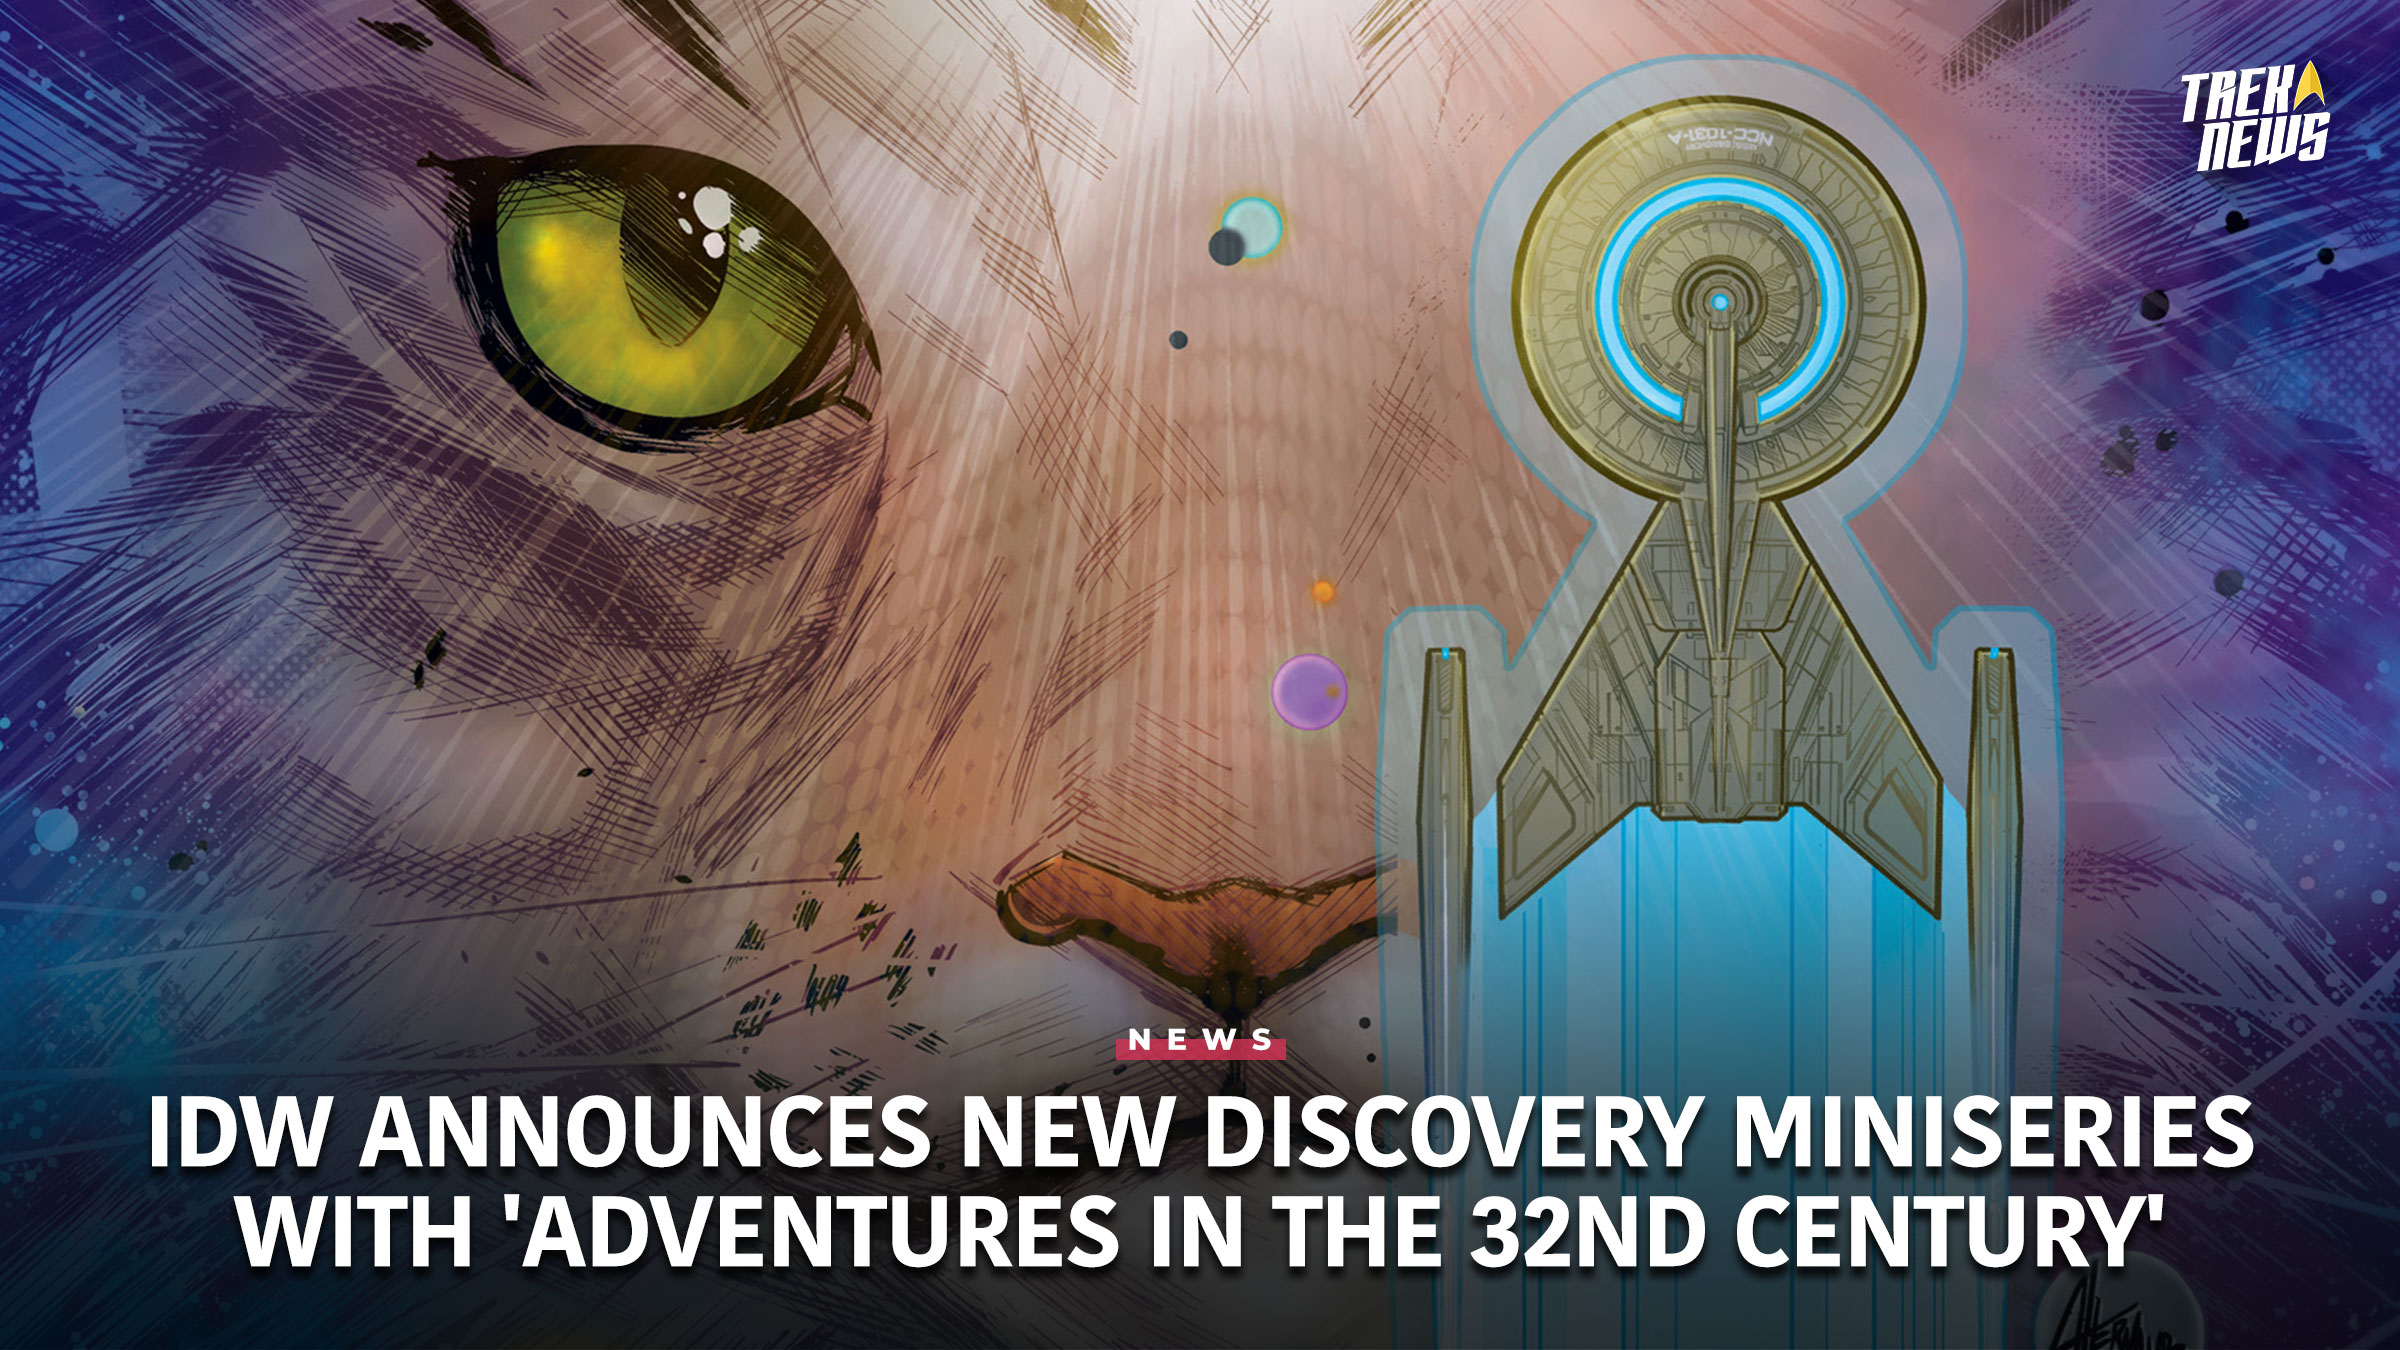 IDW Announces New Star Trek: Discovery Miniseries With ‘Adventures In The 32nd Century’